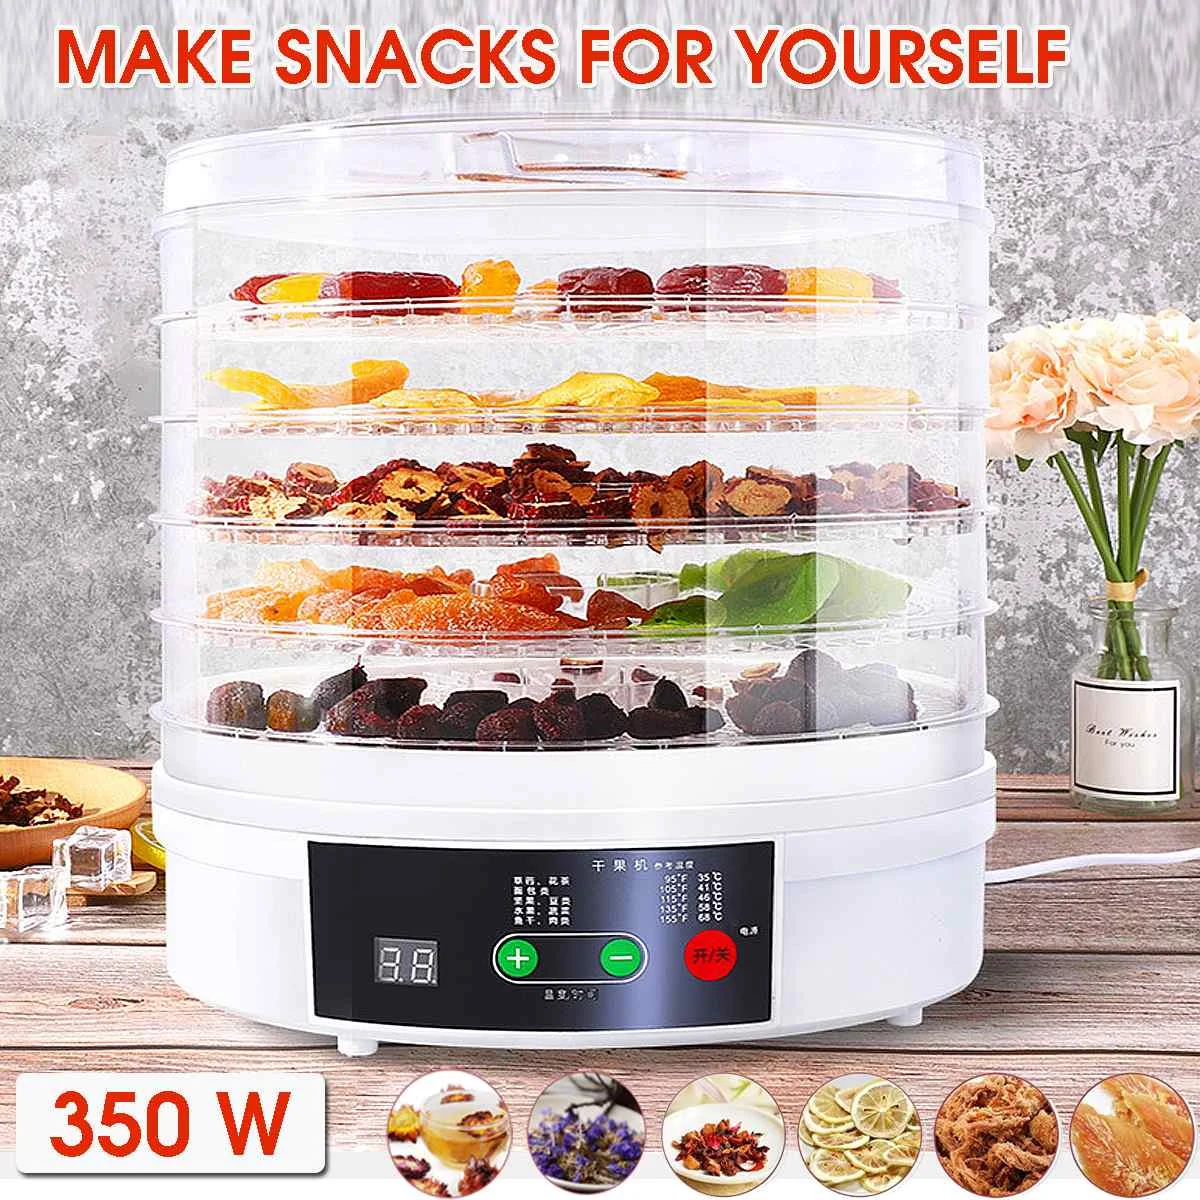 

NEW Electric Food Dehydrator for Fruits and Vegetables 350W Temperature Adjustment 5 trays Snacks Air Dryer 110/220V